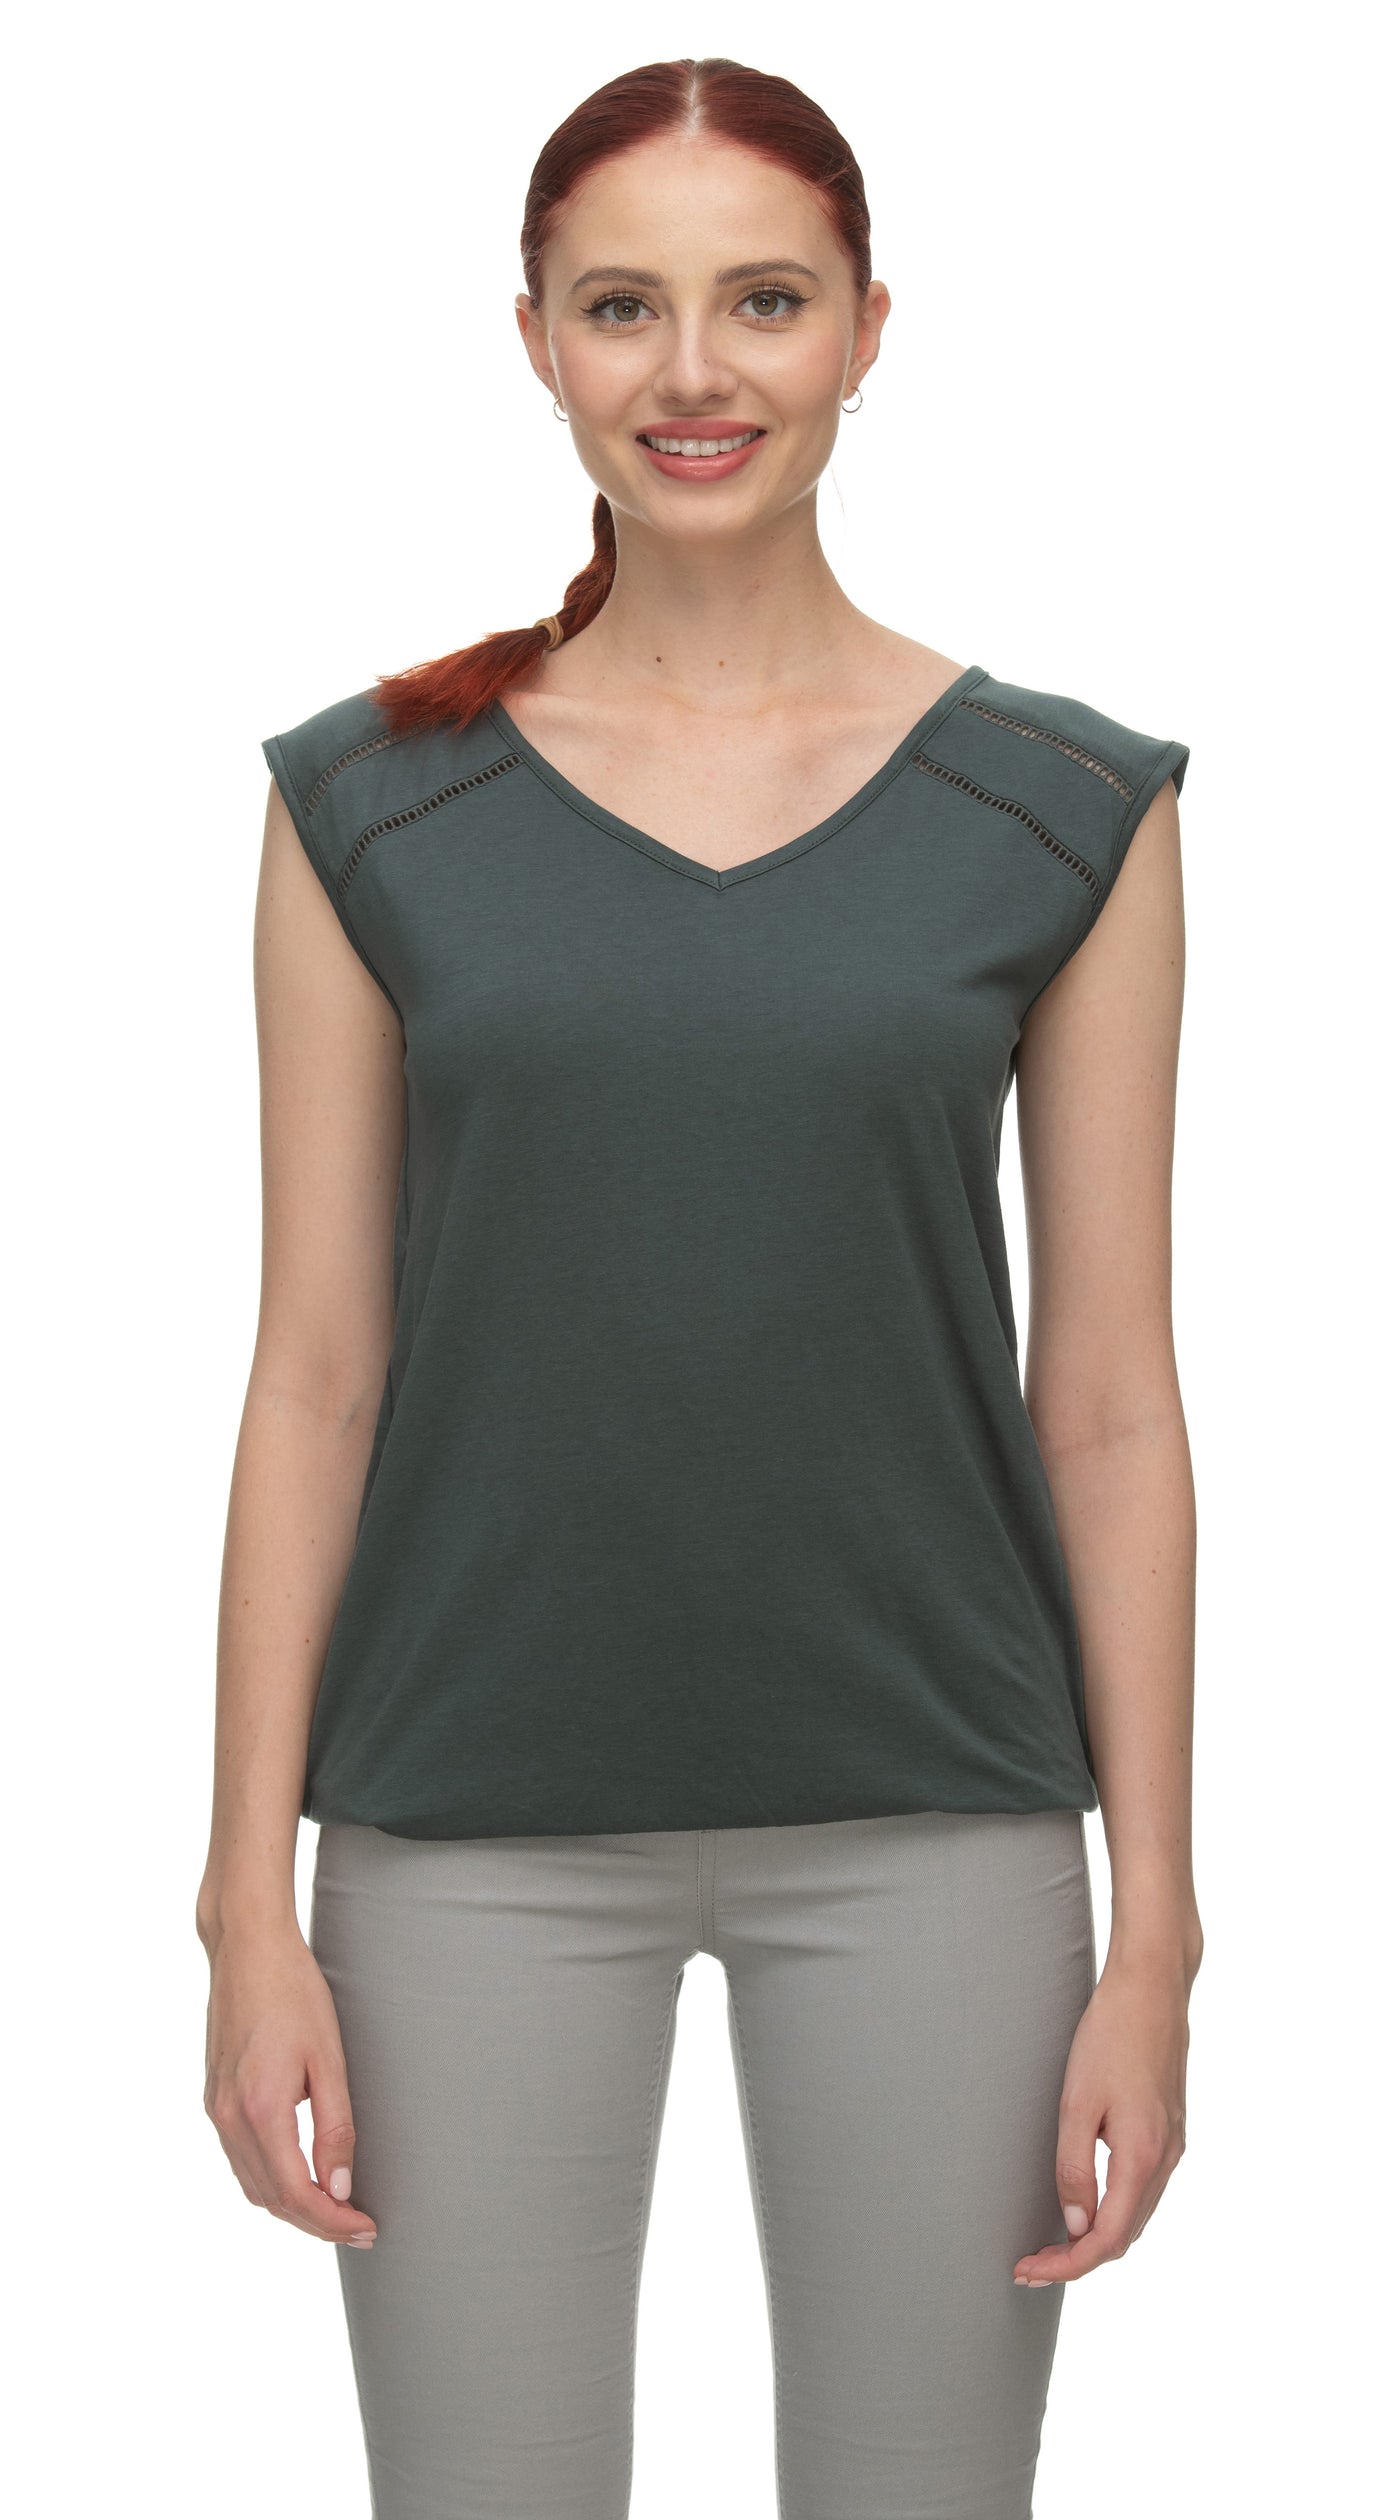 JUNGIE TOP - black, dark green, off white or red